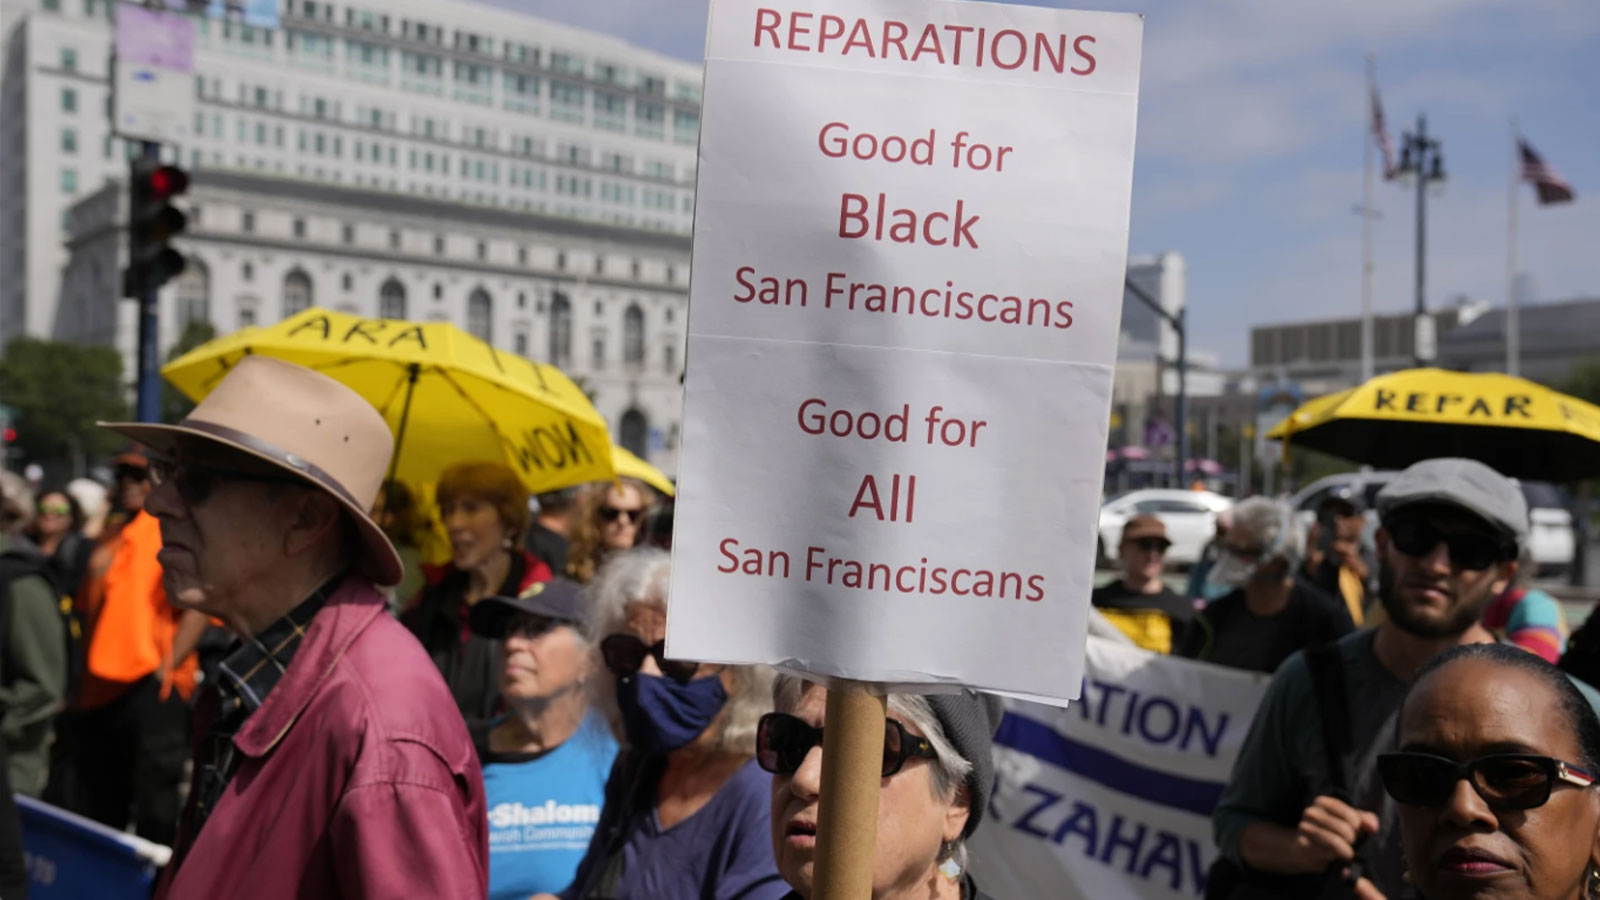 Supporters of reparations for Black residents urge San Francisco to push forward